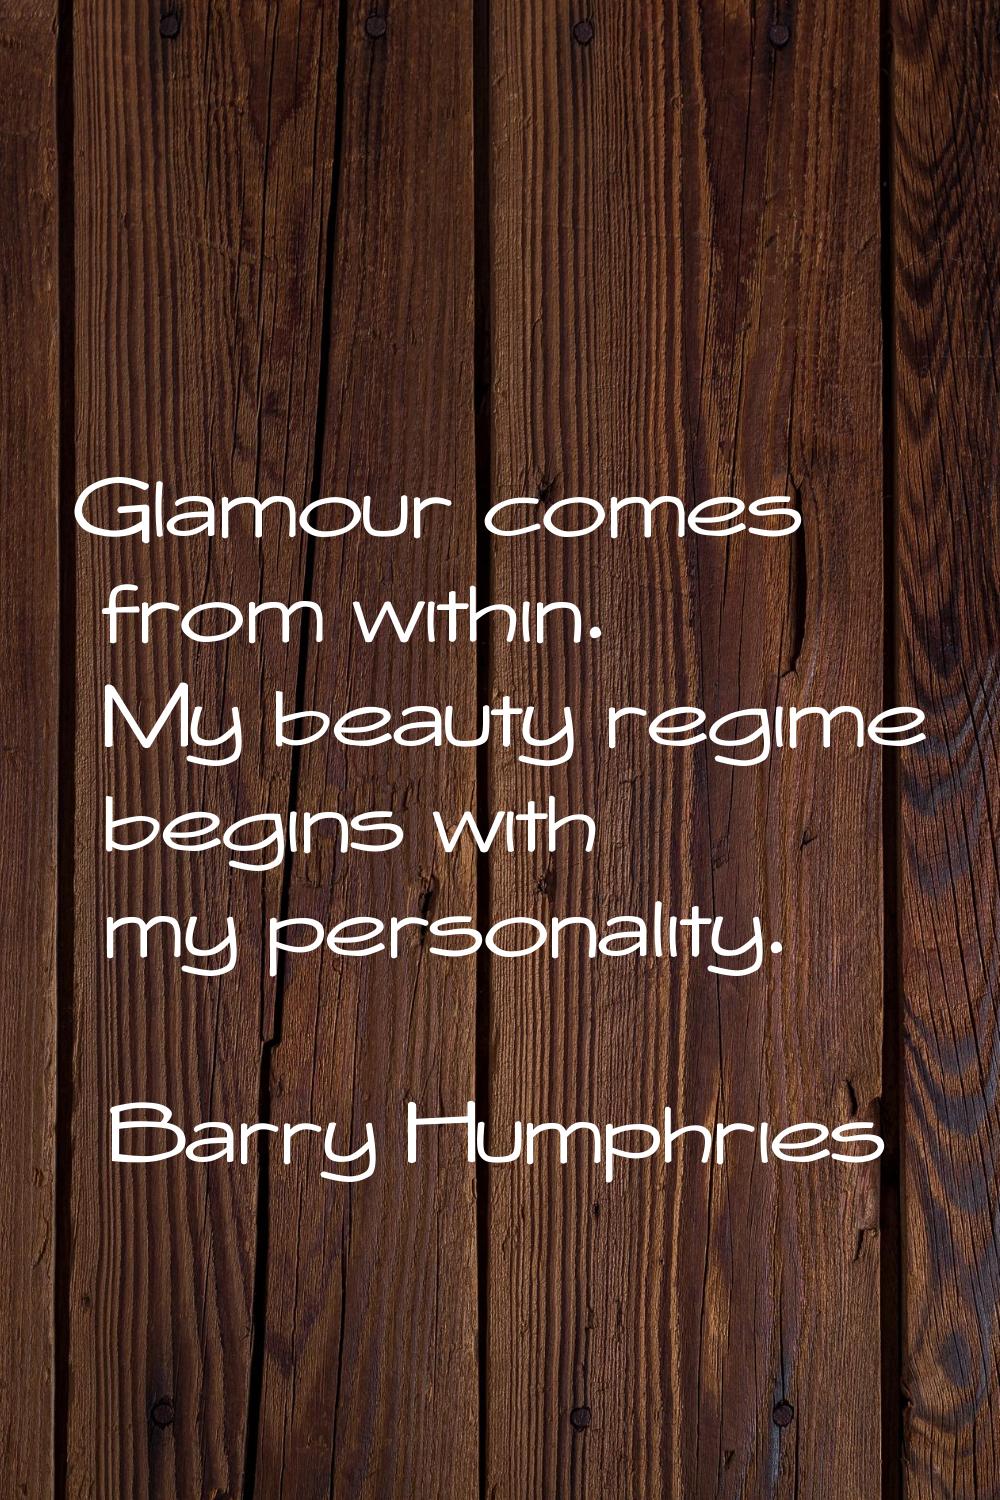 Glamour comes from within. My beauty regime begins with my personality.